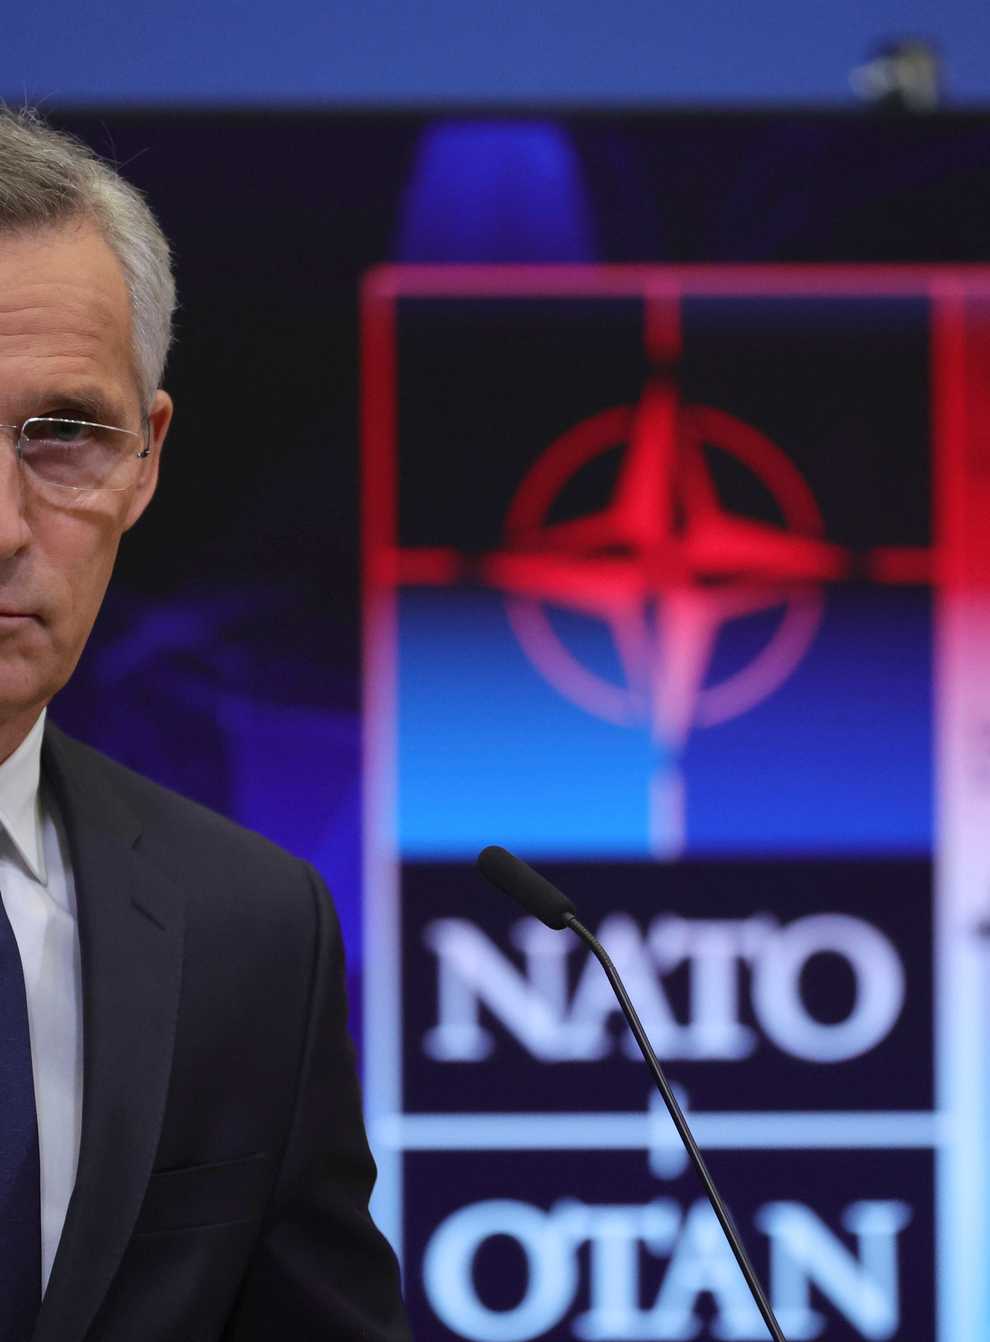 Nato secretary-general Jens Stoltenberg speaks during a press conference at the Nato headquarters in Brussels (Olivier Matthys/AP)